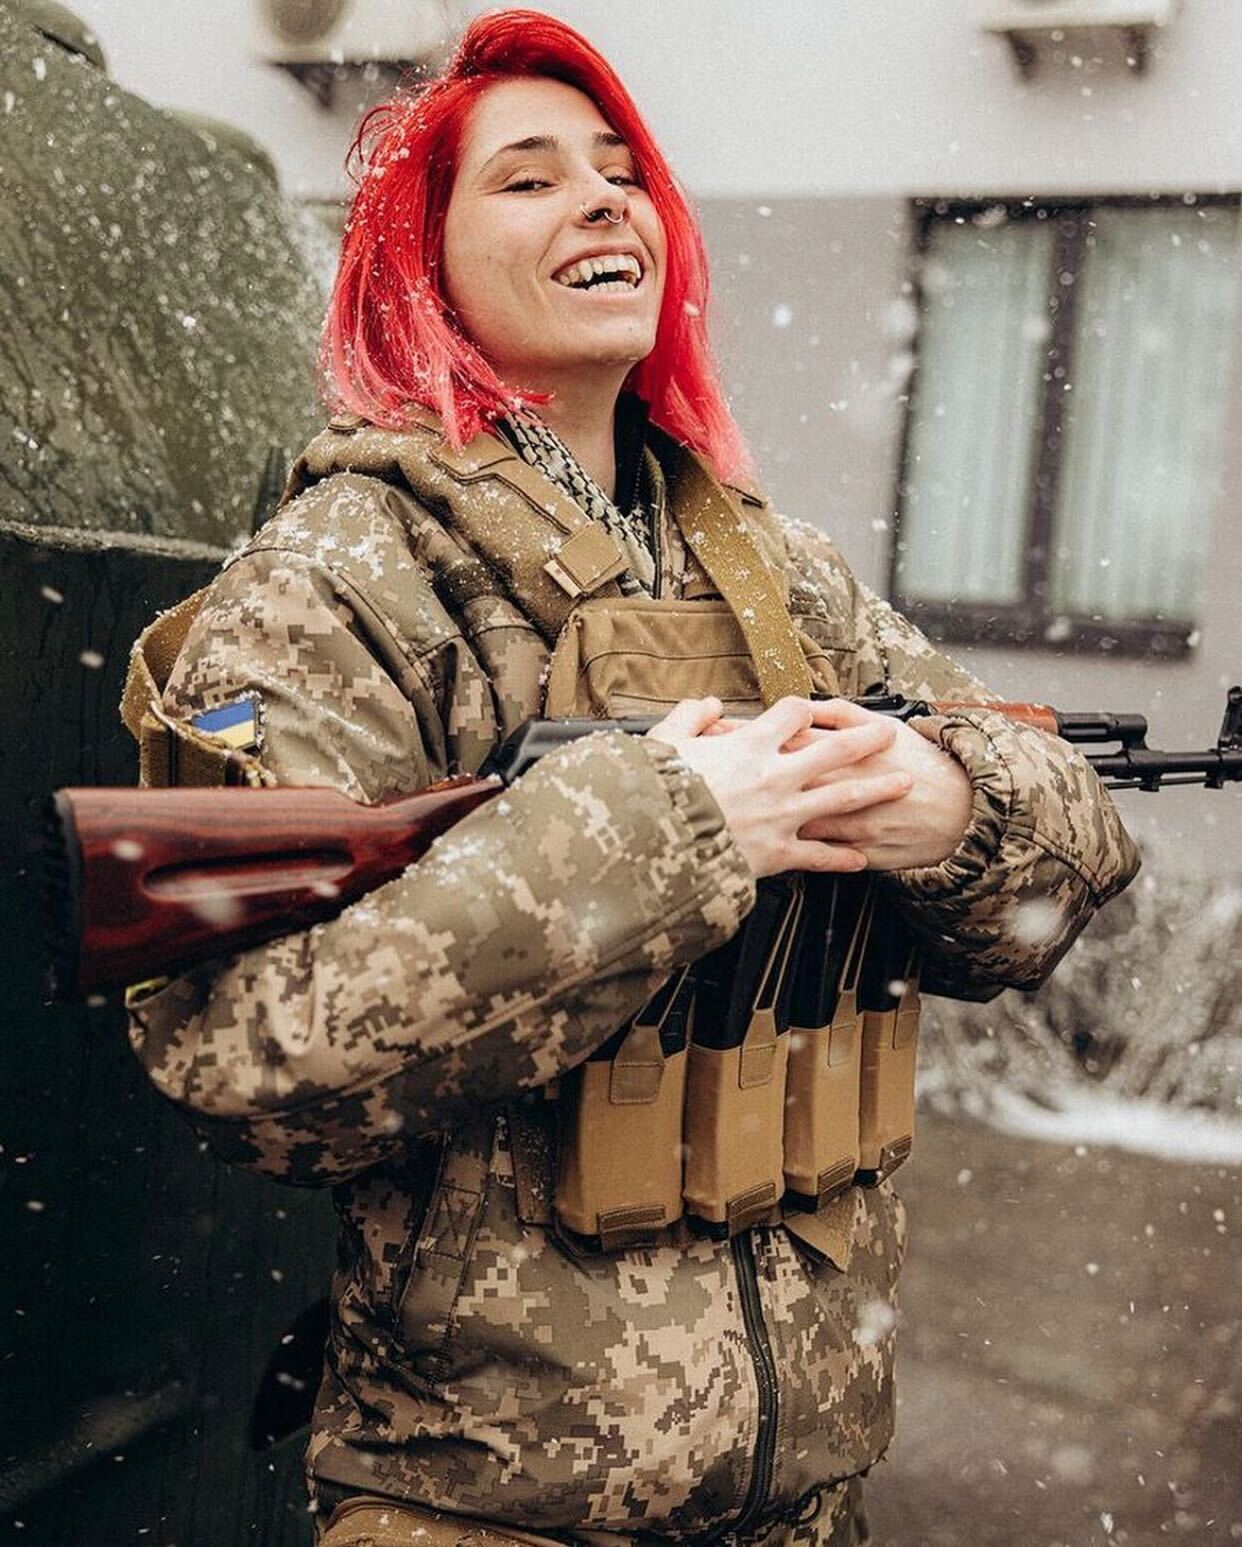 photo of Ukrainian soldier with dyed pink hair and a gun, smiling as snow falls